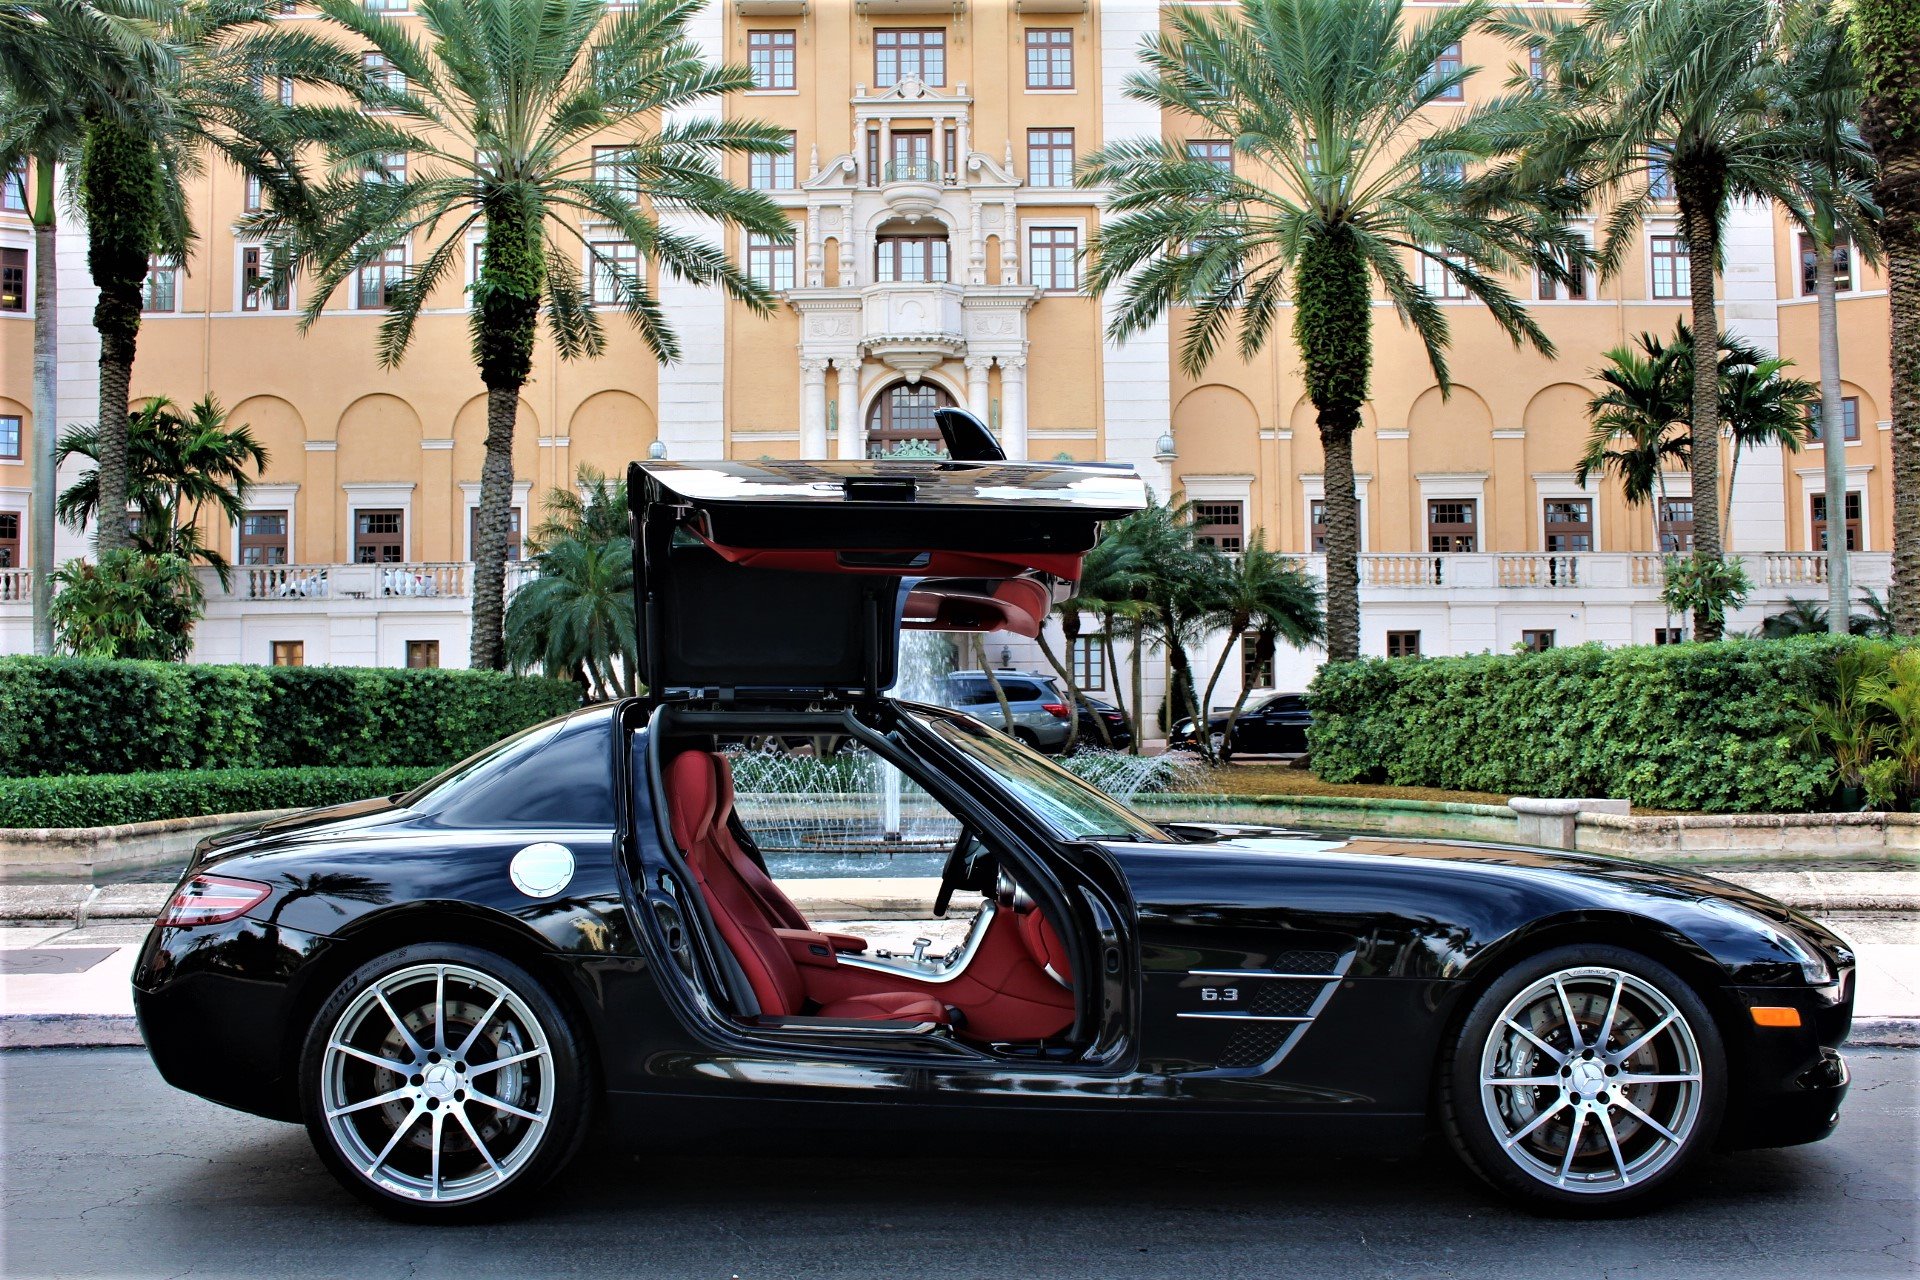 Used 2011 Mercedes-Benz SLS AMG for sale Sold at The Gables Sports Cars in Miami FL 33146 1